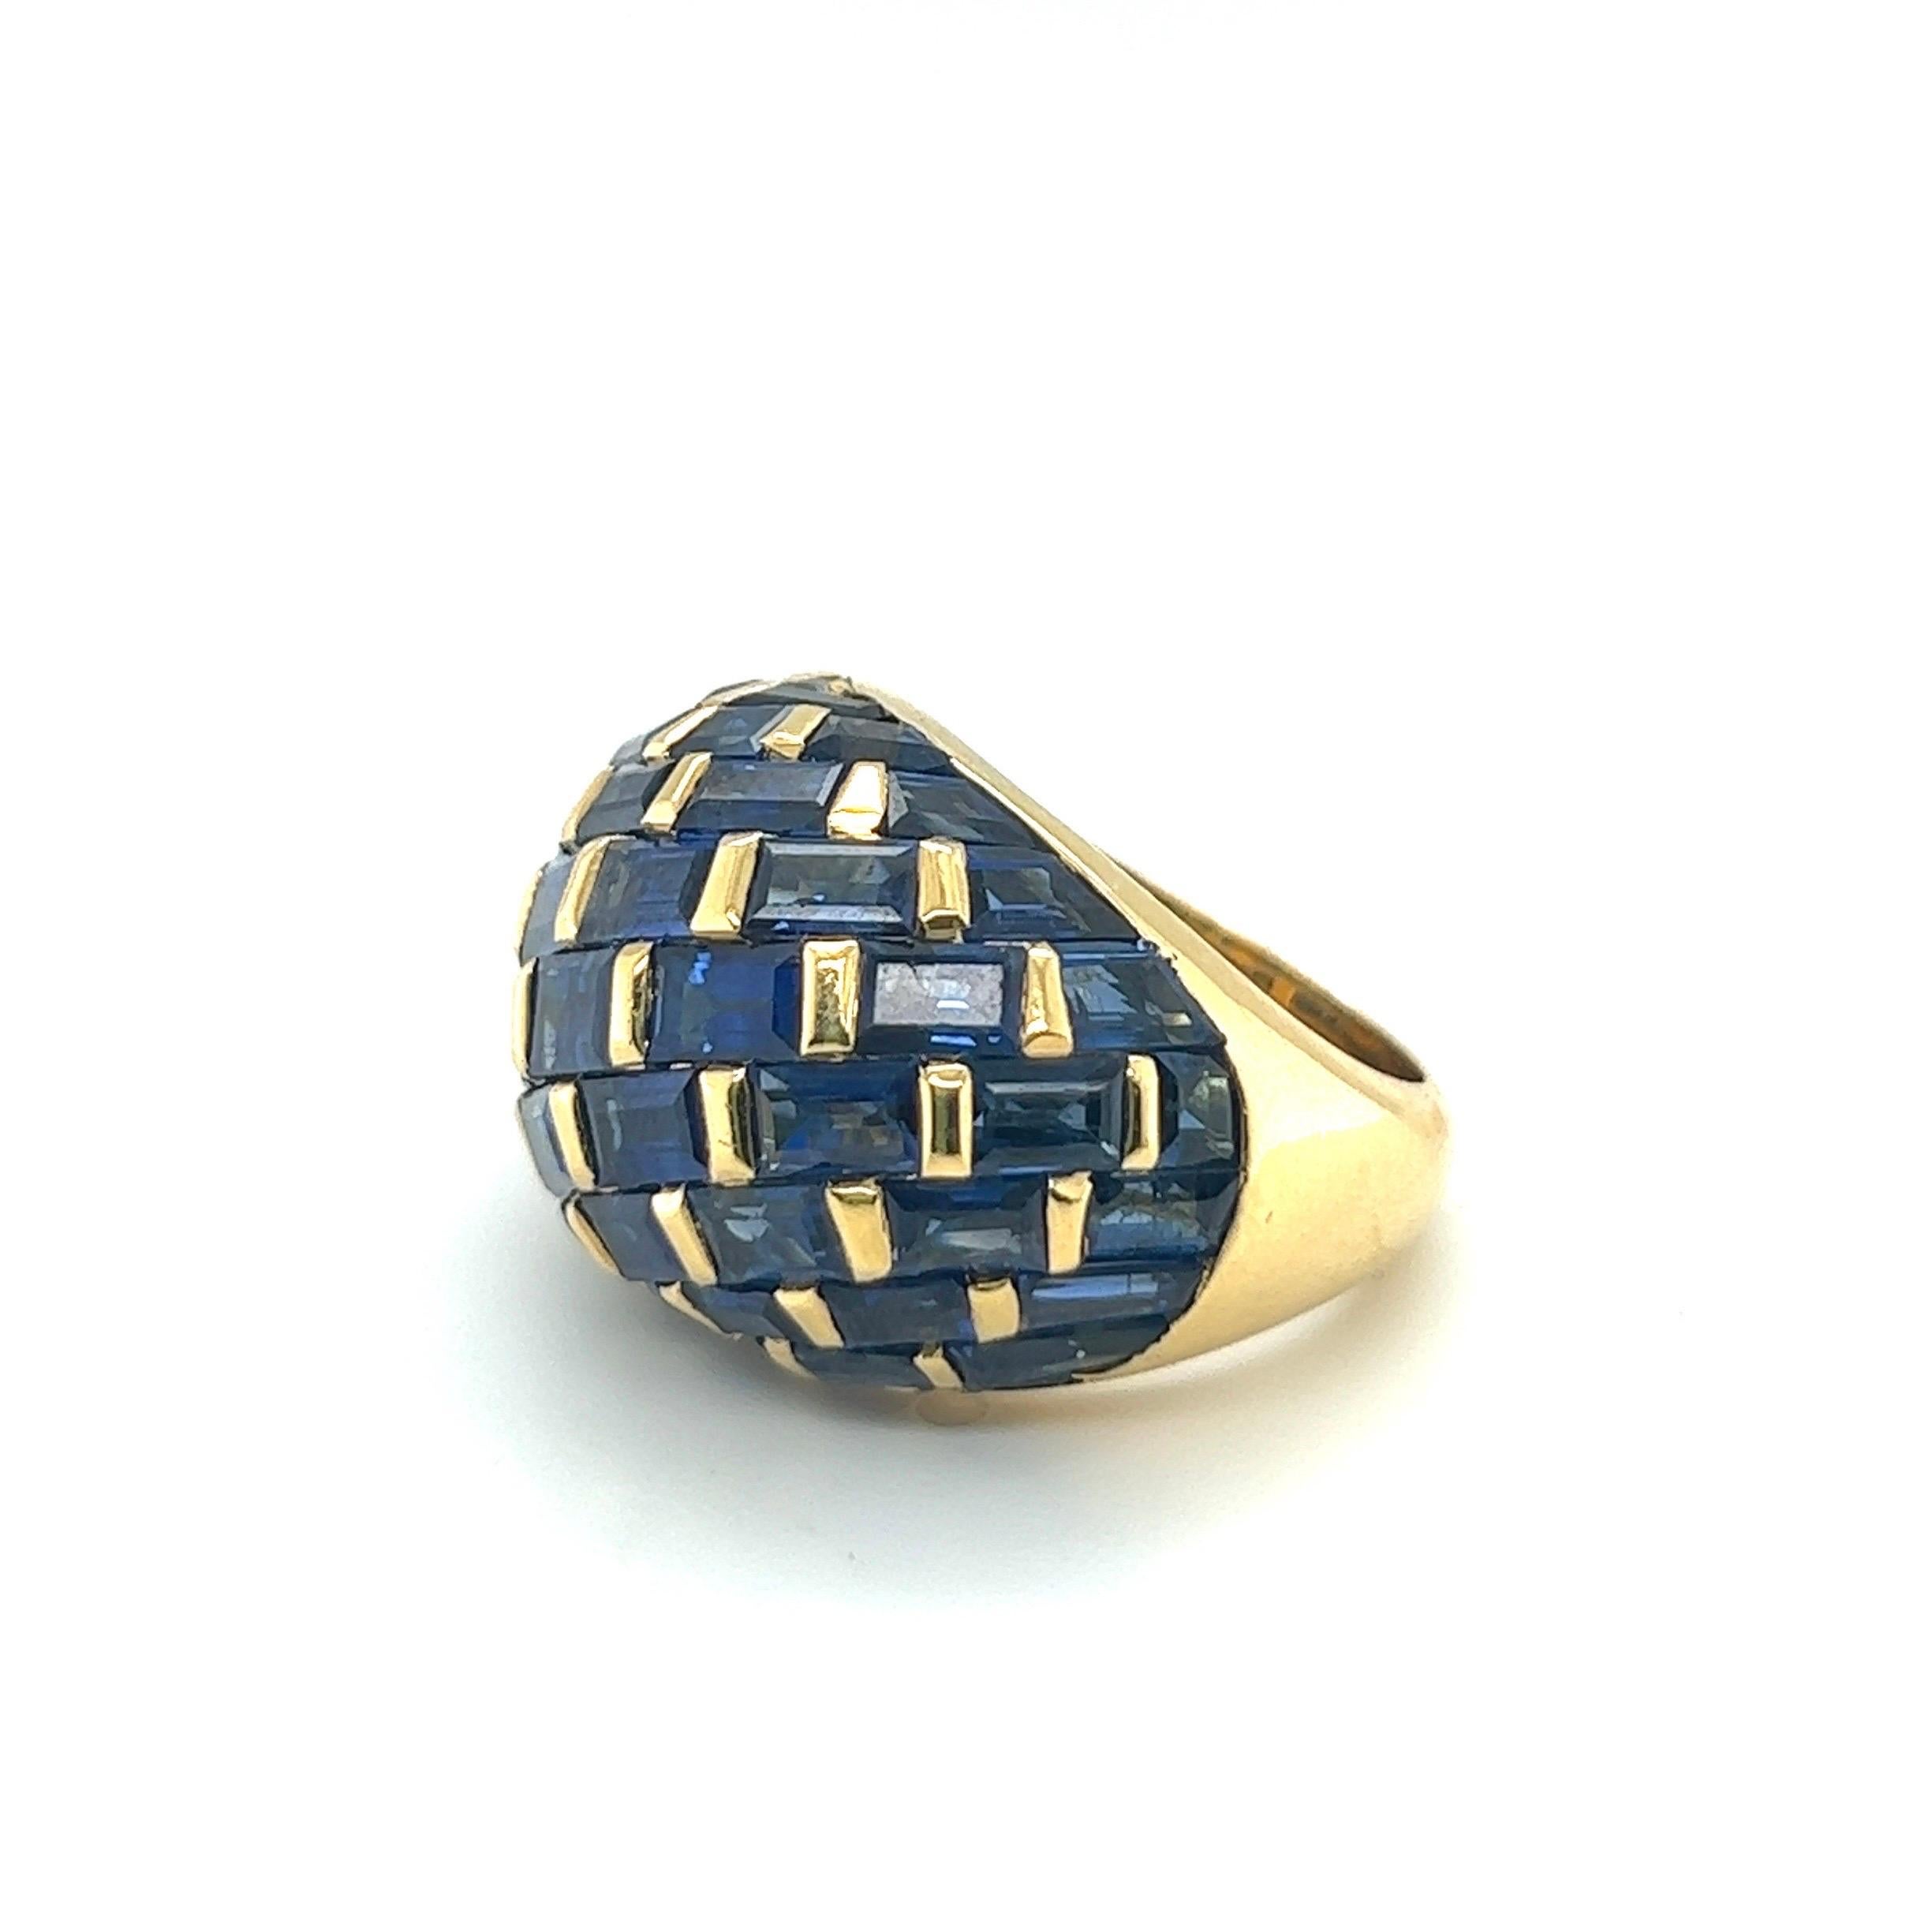 Ravishing 18 karat yellow gold and sapphire cocktail ring, circa 1970s.

Crafted in 18 karat yellow gold, of bombé design, the dome fully set with numerous sapphire baguettes and trapezes of a deep yet luminous blue shade. The way the sapphires are